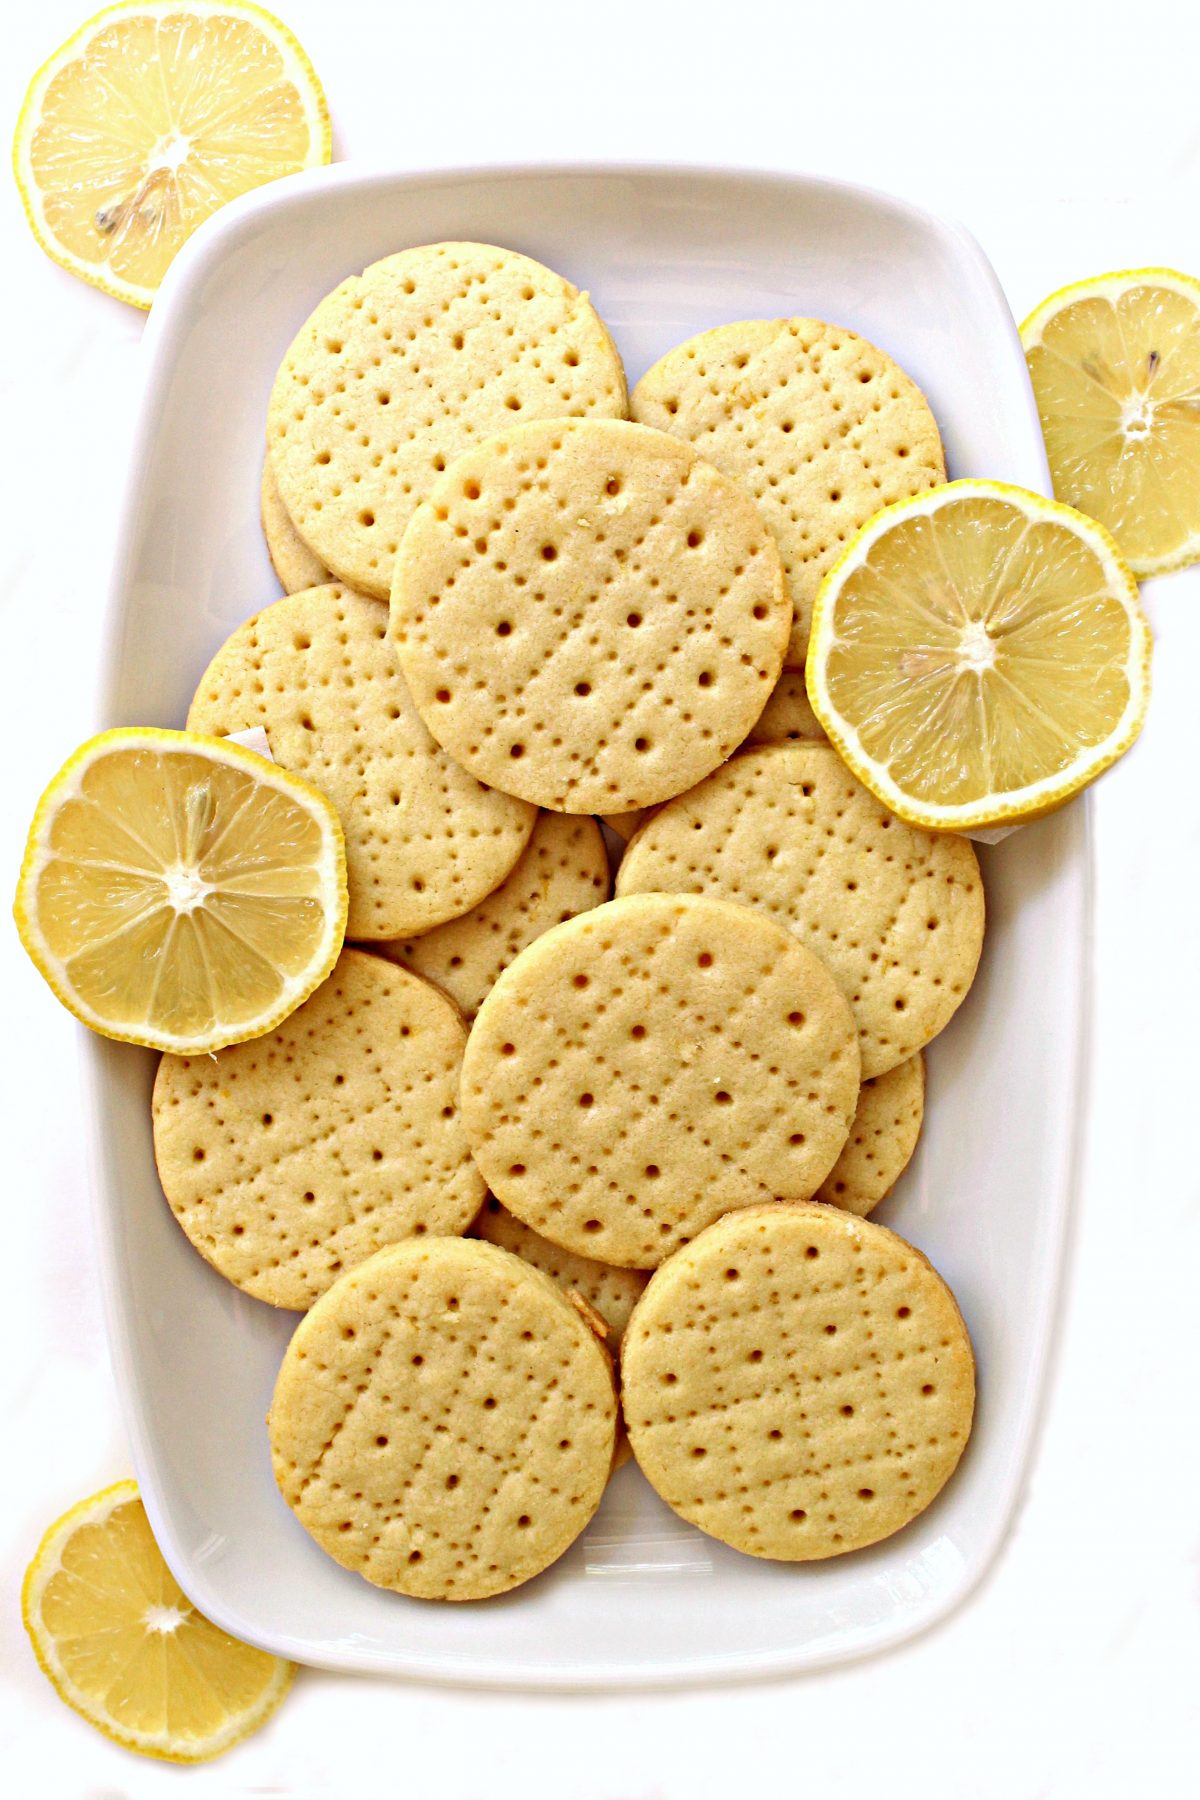 Shrewsbury Biscuits on a white platter with a few slices of lemon.